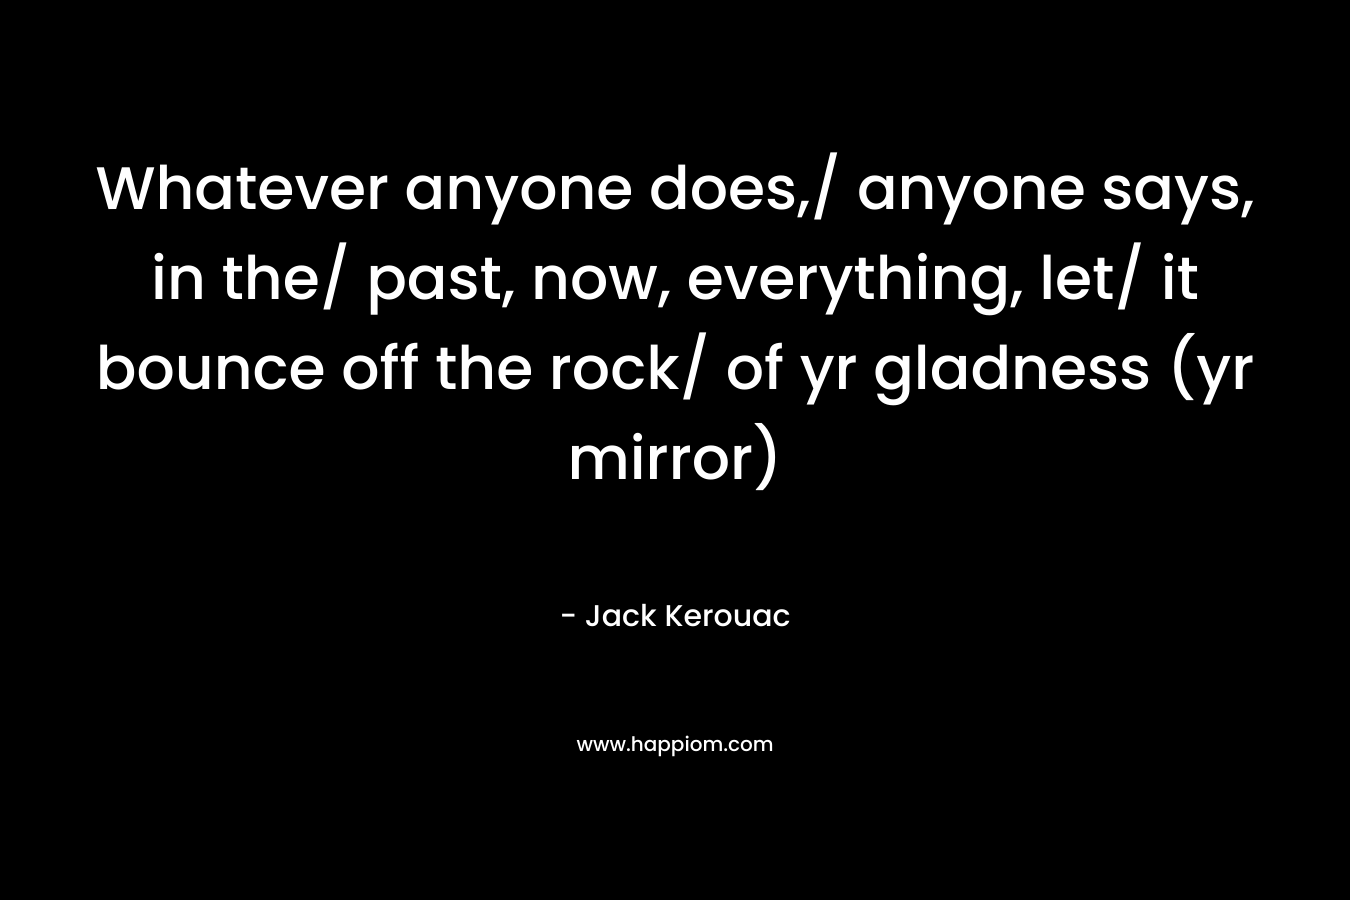 Whatever anyone does,/ anyone says, in the/ past, now, everything, let/ it bounce off the rock/ of yr gladness (yr mirror) – Jack Kerouac